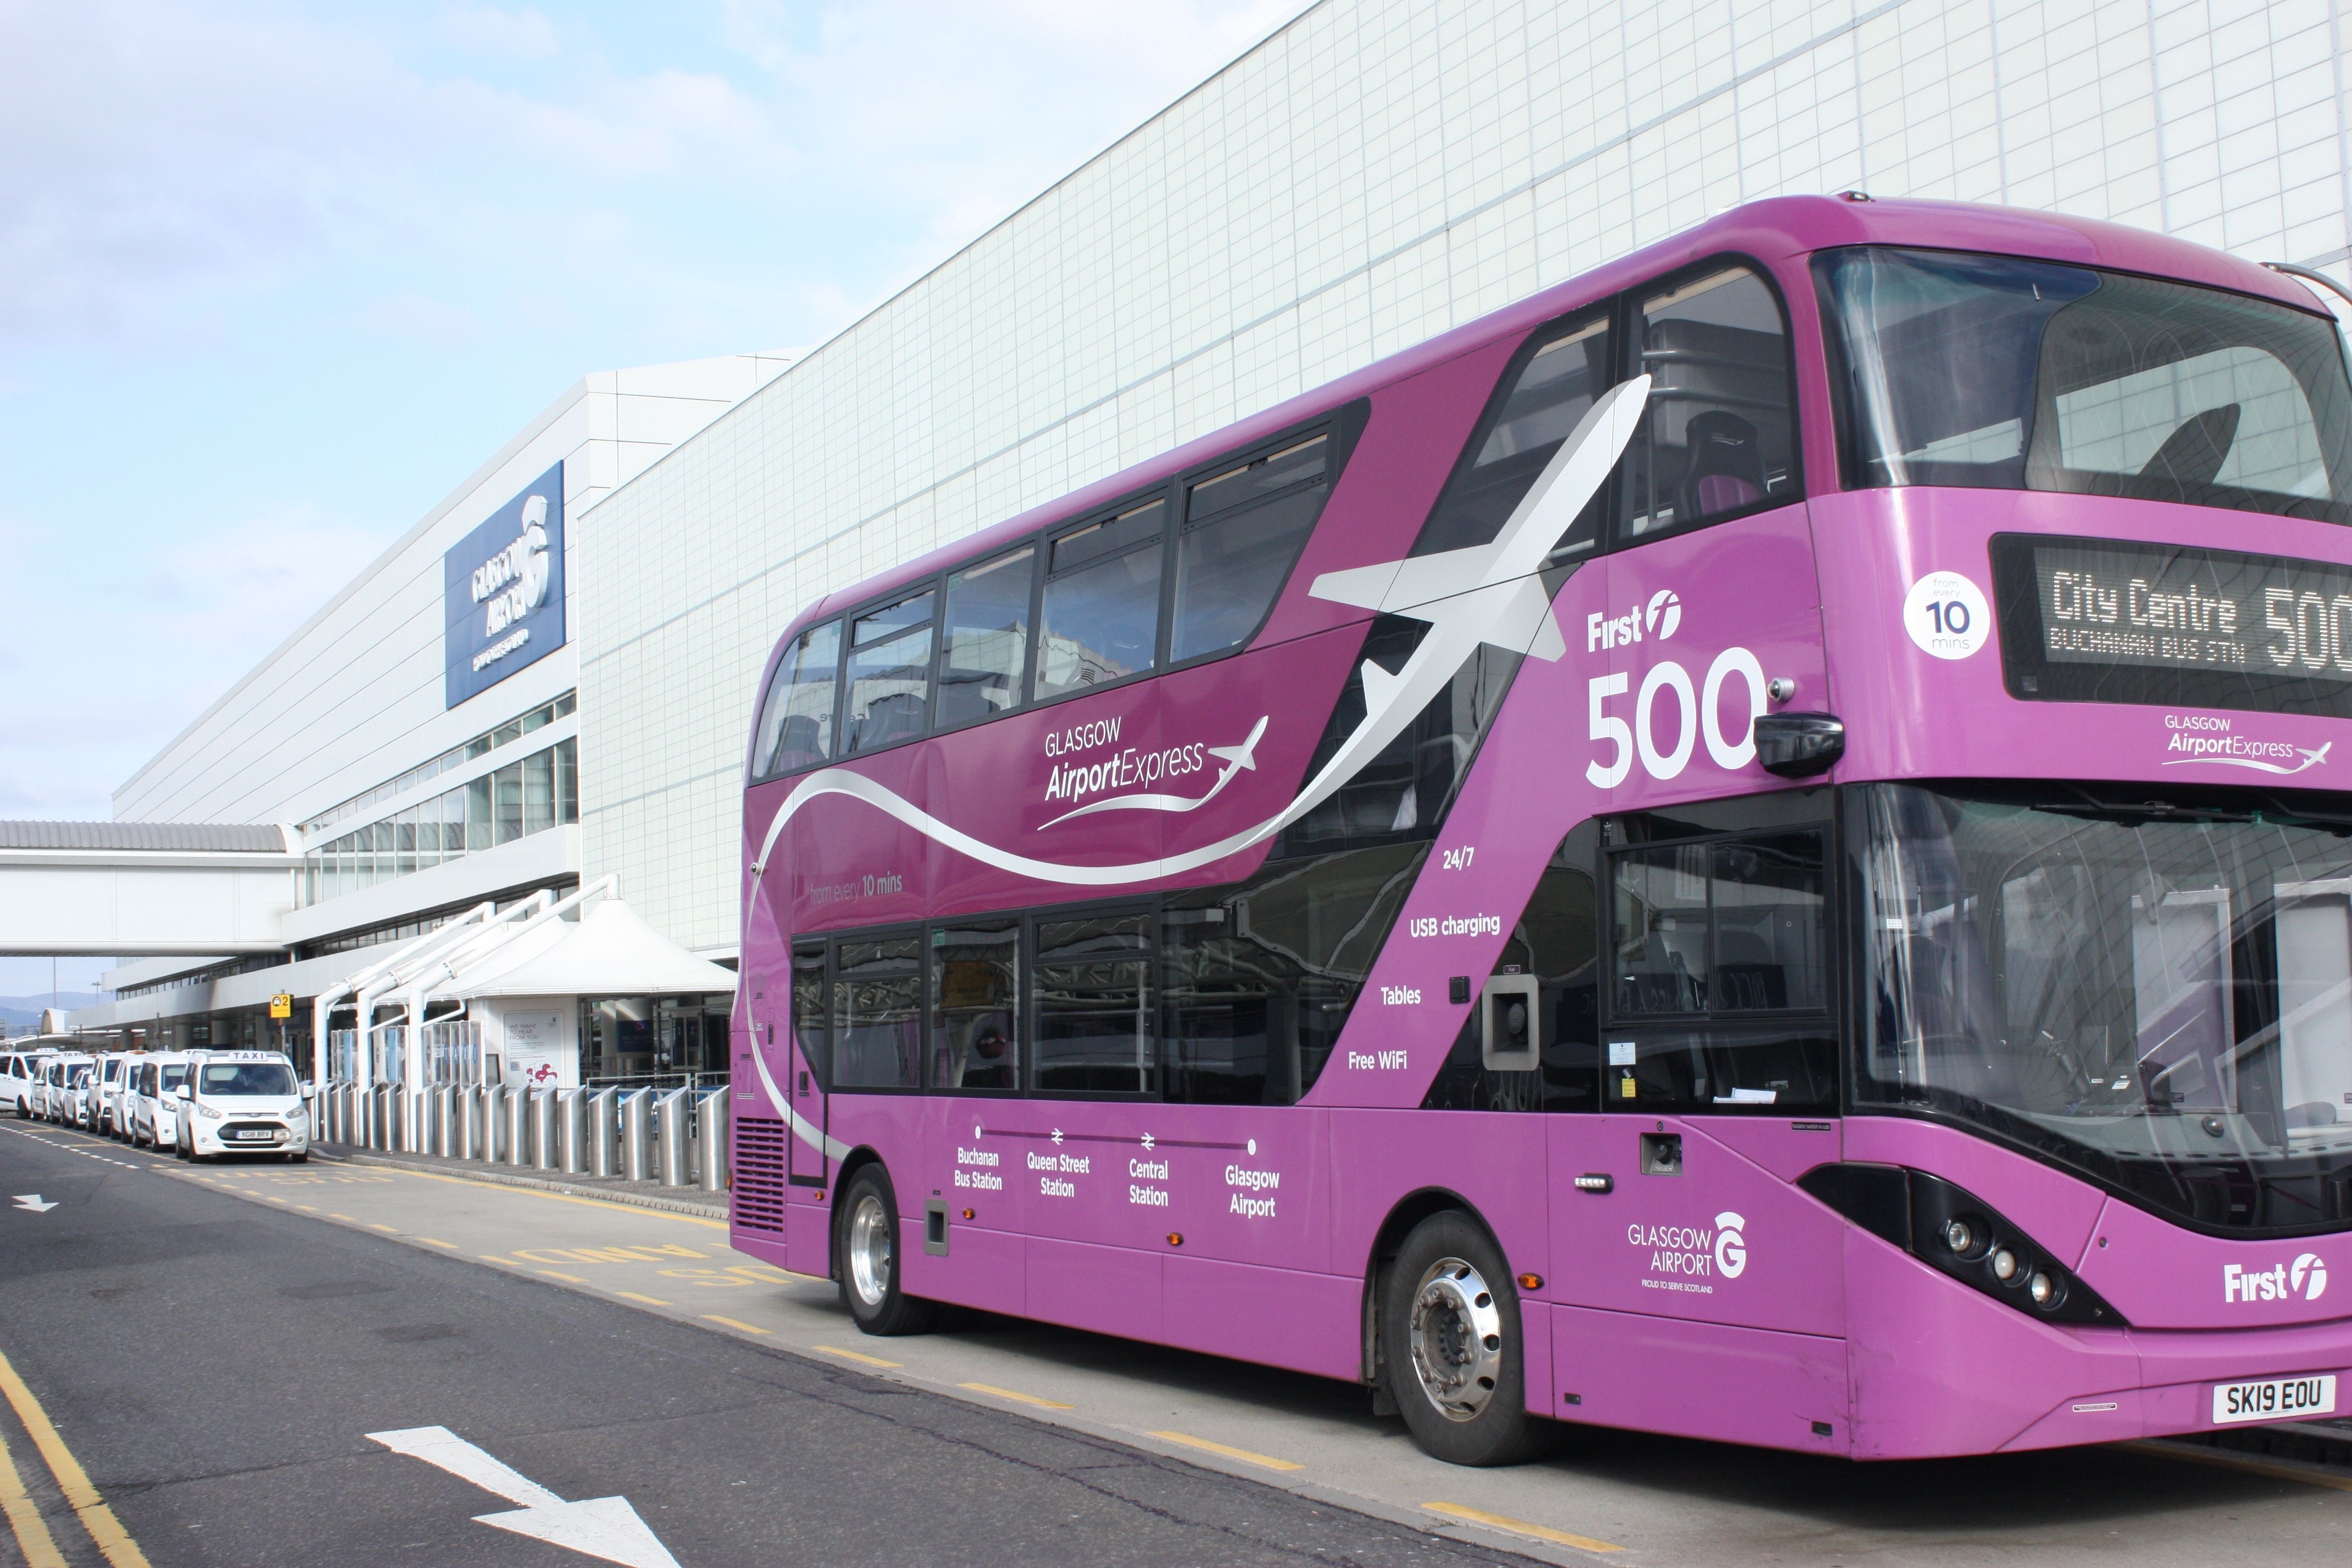 Glasgow Airport 500 Bus Outside Terminal Building